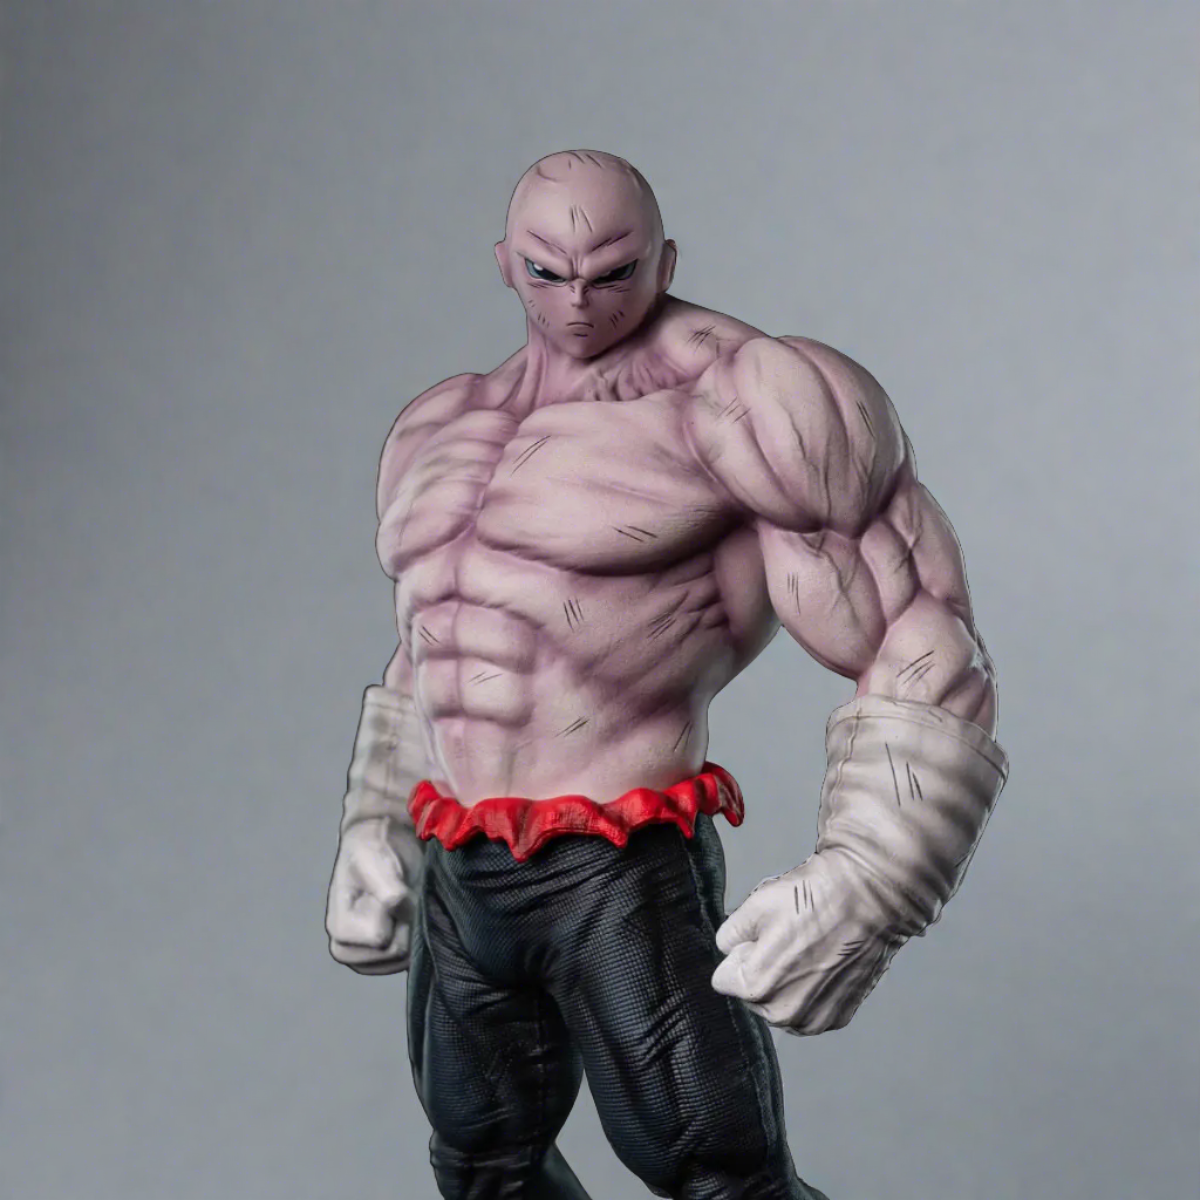 Dragon Ball Super Jiren figurine, presented from the front, with a focused expression and an imposing stance, displaying his striking musculature and signature red and gray attire, ideal for collectors of anime memorabilia.